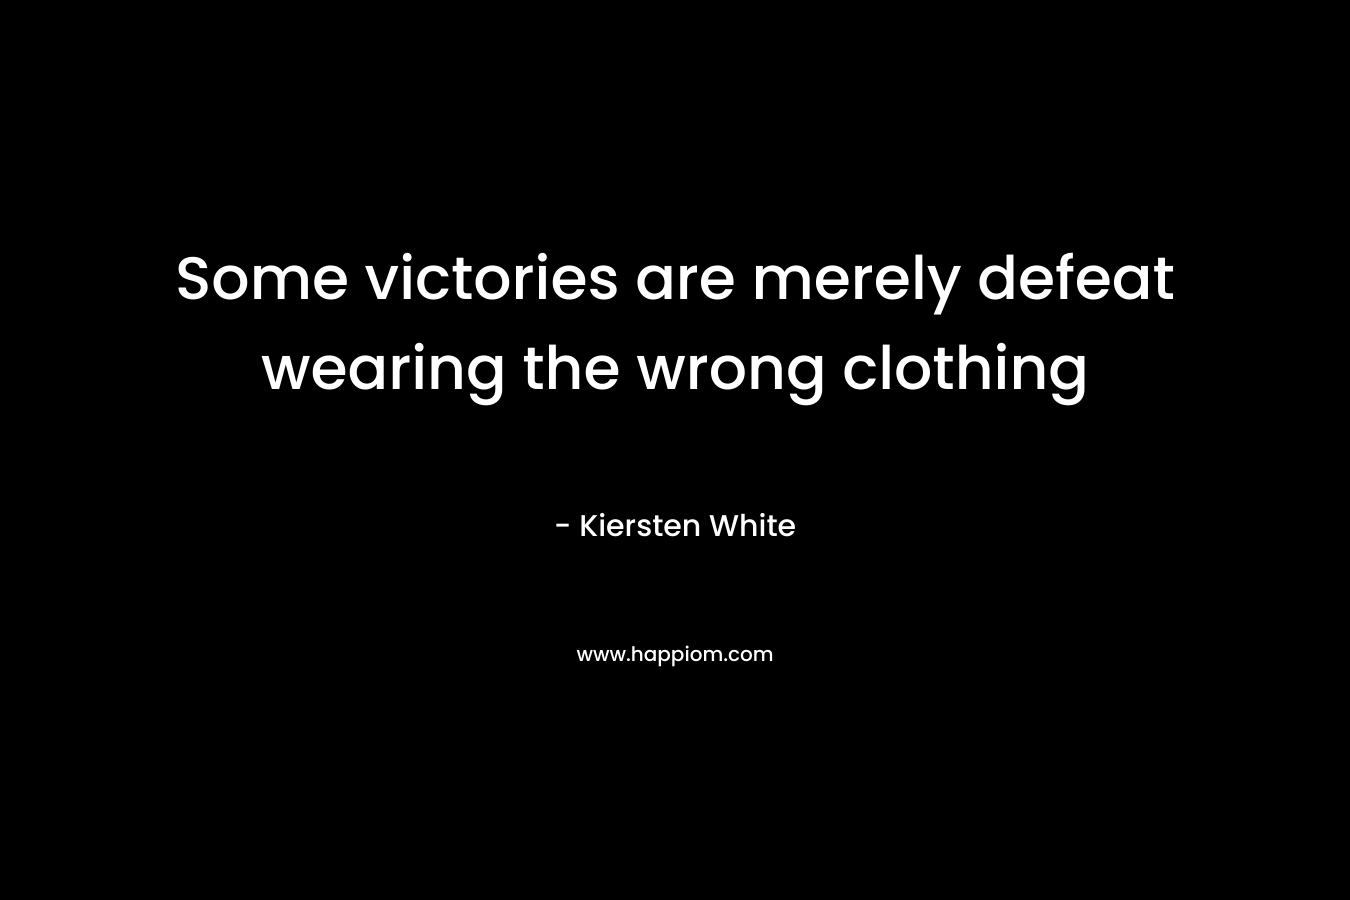 Some victories are merely defeat wearing the wrong clothing